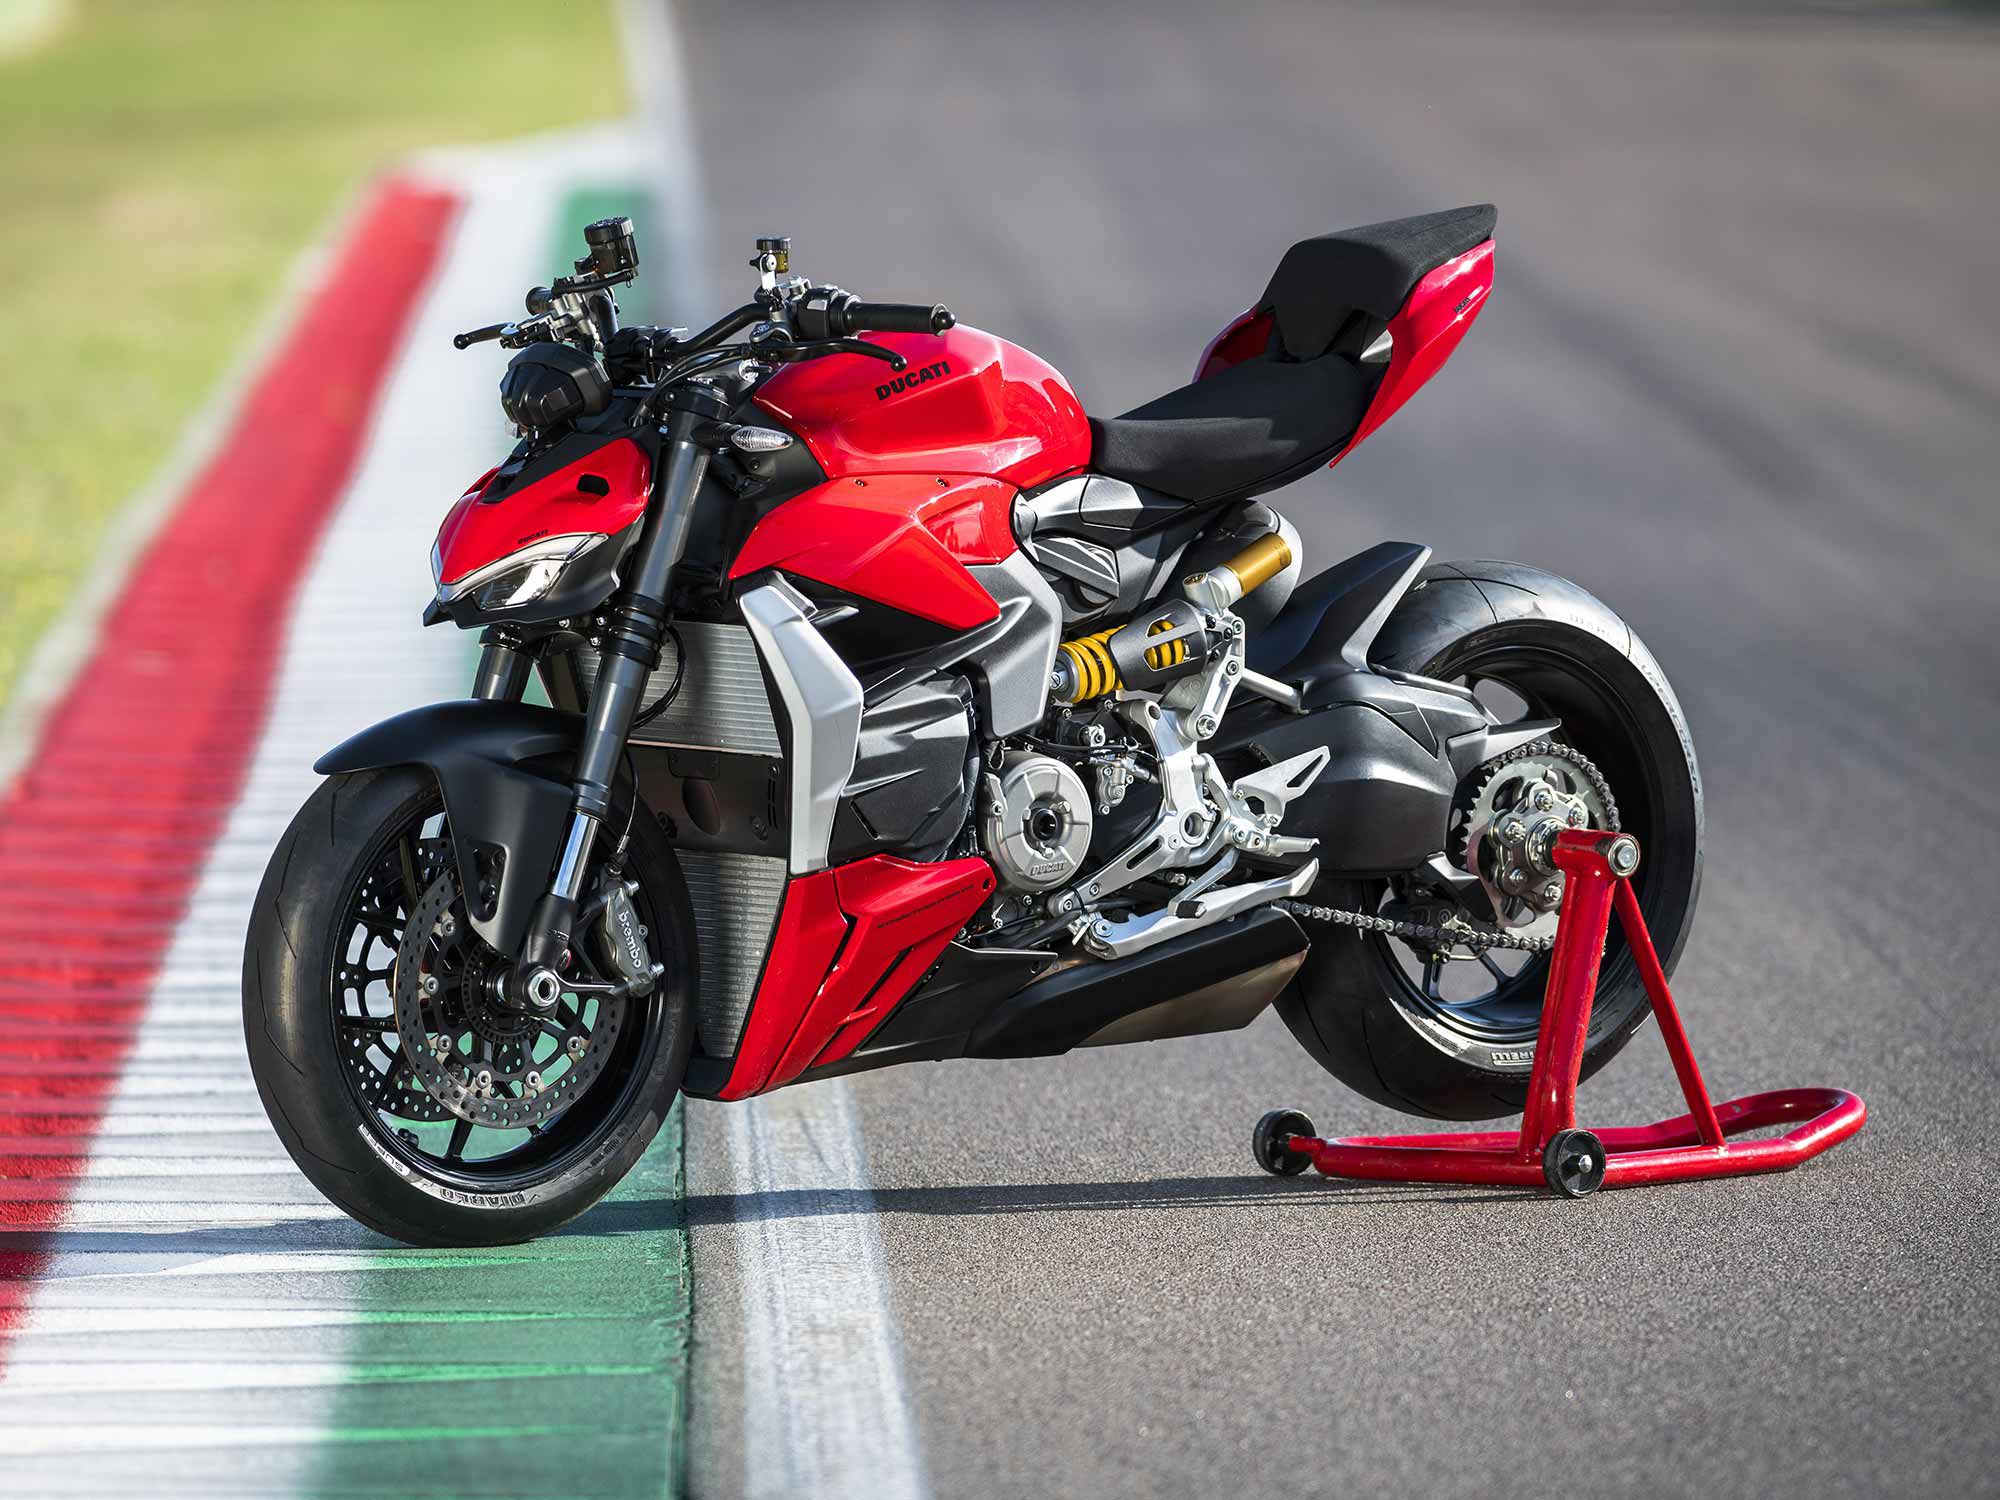 As you’d expect, an Akrapovič full-system exhaust is an accessory (closed-course-use only). For that, weight is reduced by 15.4 pounds, and power increases from 153 hp to 157 hp, while torque also increases by 2.2 pound-feet.